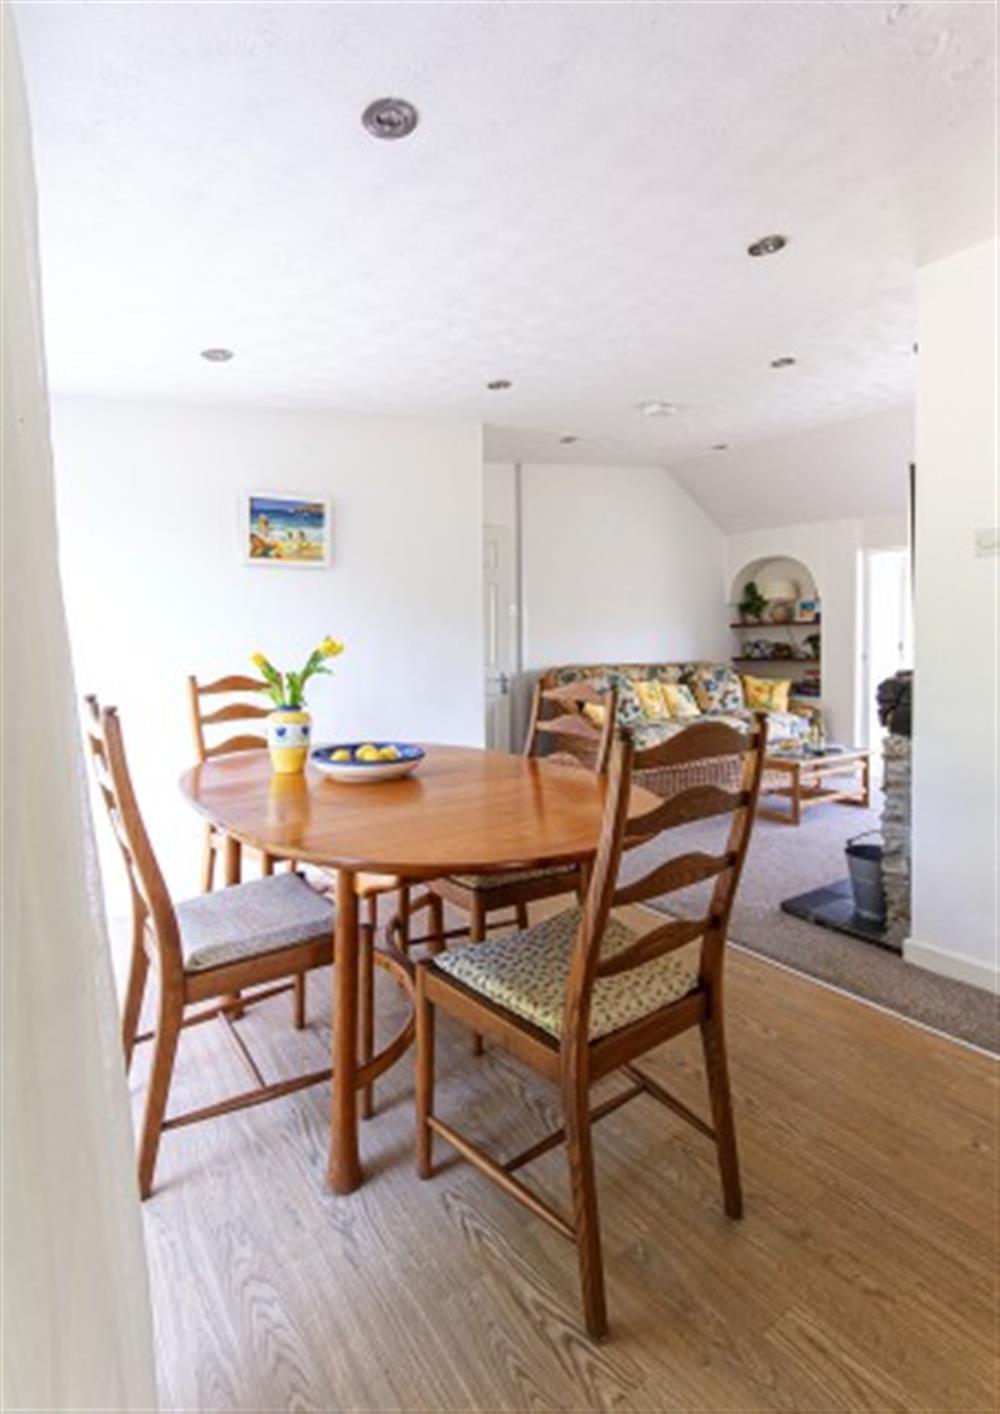 Dining area continued at Barnhill in Crantock